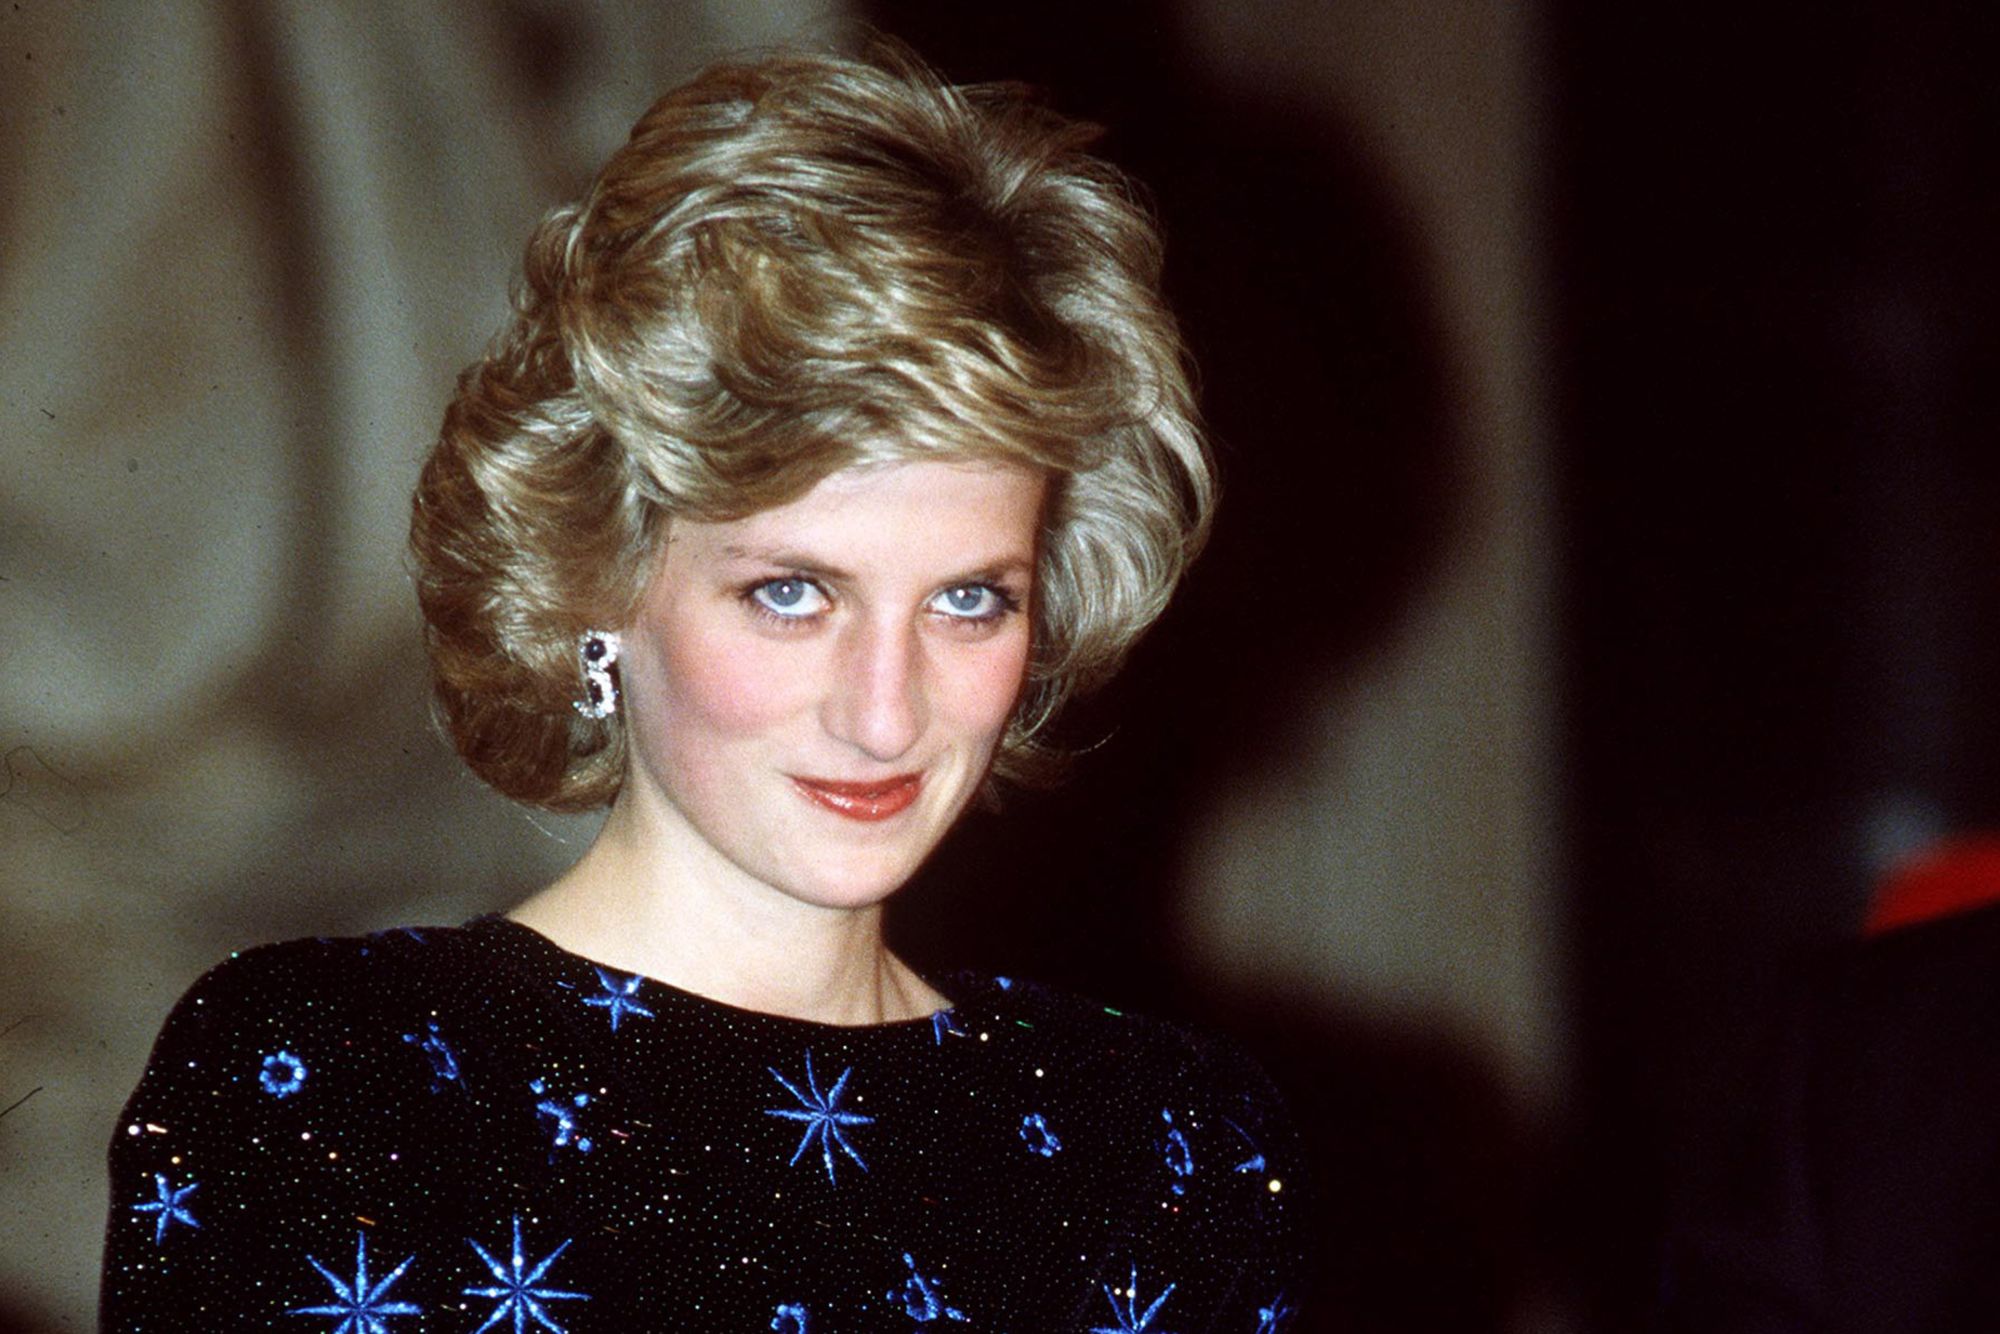 at fetches $1.148 record dress star-spangled | CNN Princess evening million Diana\'s auction